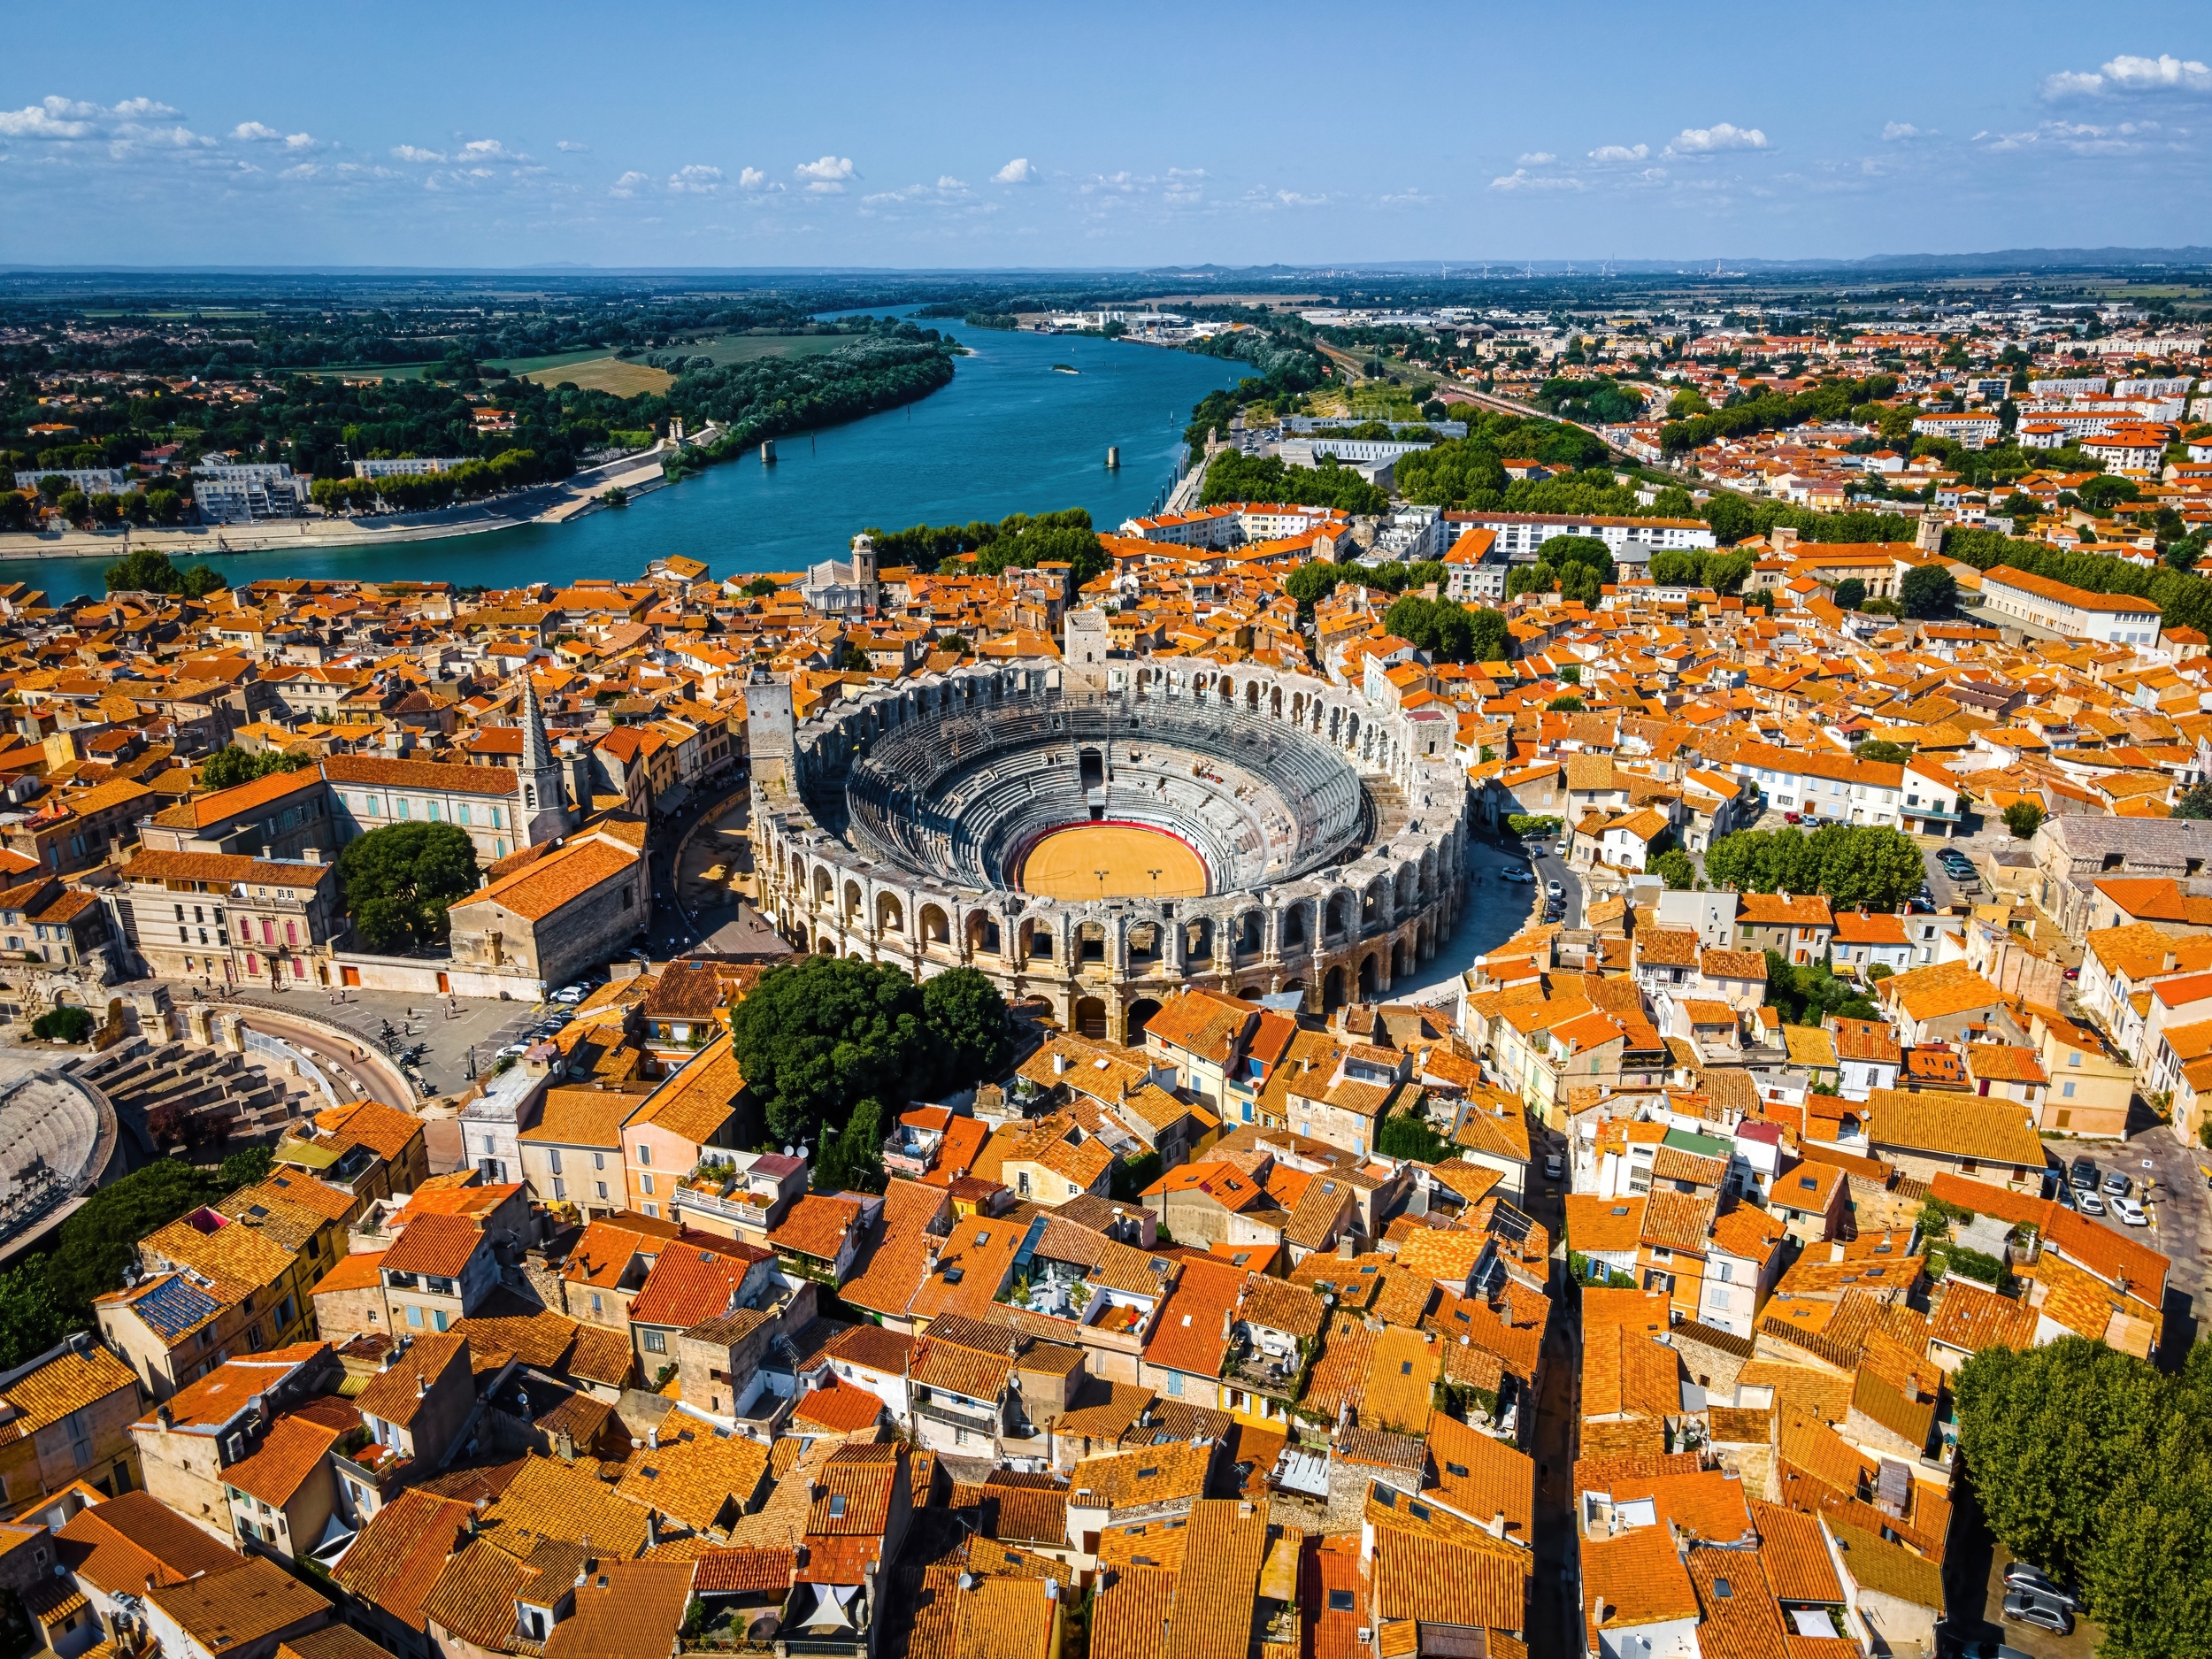 <p>Italy isn't the only country with Roman ruins worth visiting! Arles, just south of Avignon, has a huge Roman arena and an adorable town that are well worth visiting.</p><p><a href='https://www.msn.com/en-us/community/channel/vid-cj9pqbr0vn9in2b6ddcd8sfgpfq6x6utp44fssrv6mc2gtybw0us'>Follow us on MSN to see more of our exclusive lifestyle content.</a></p>